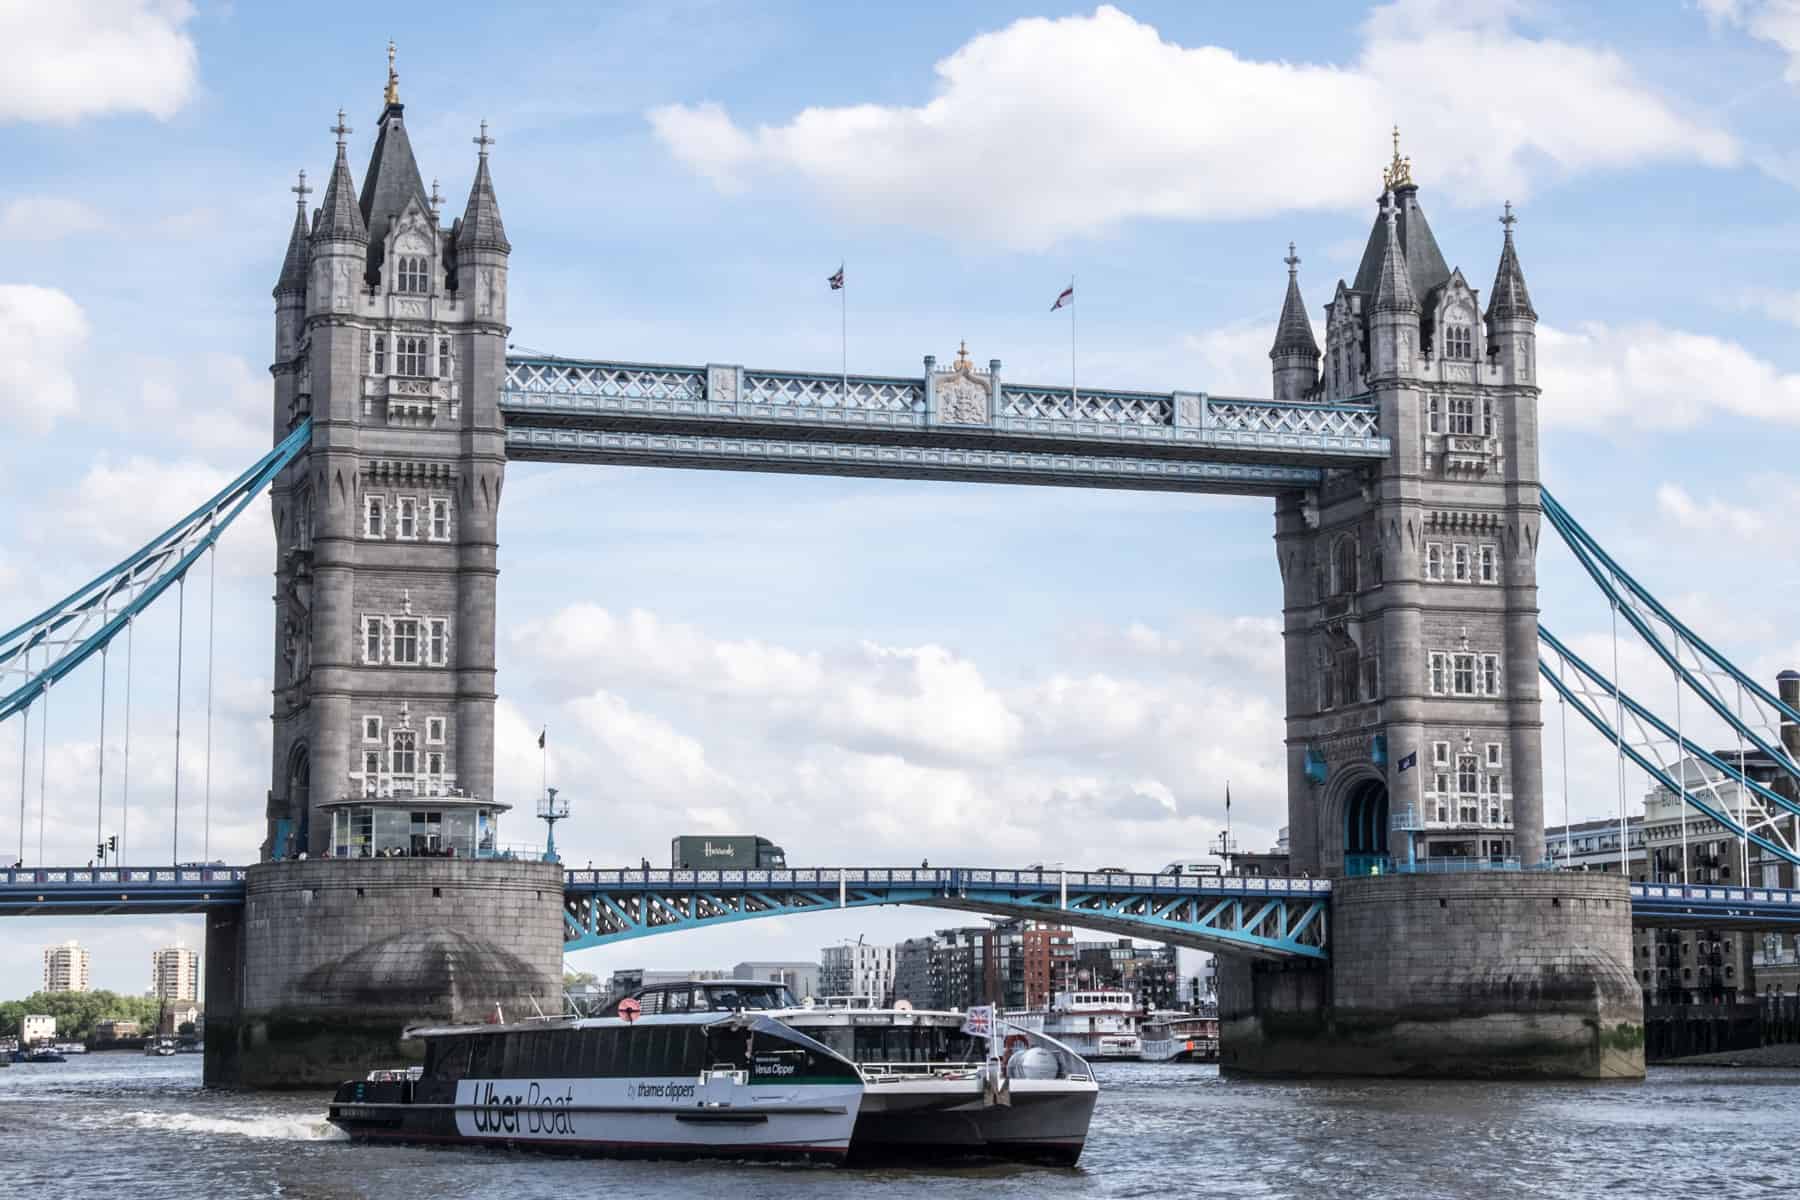 A black and white Uber boat passes the grey and blue Tower Bridge on the Thames. 